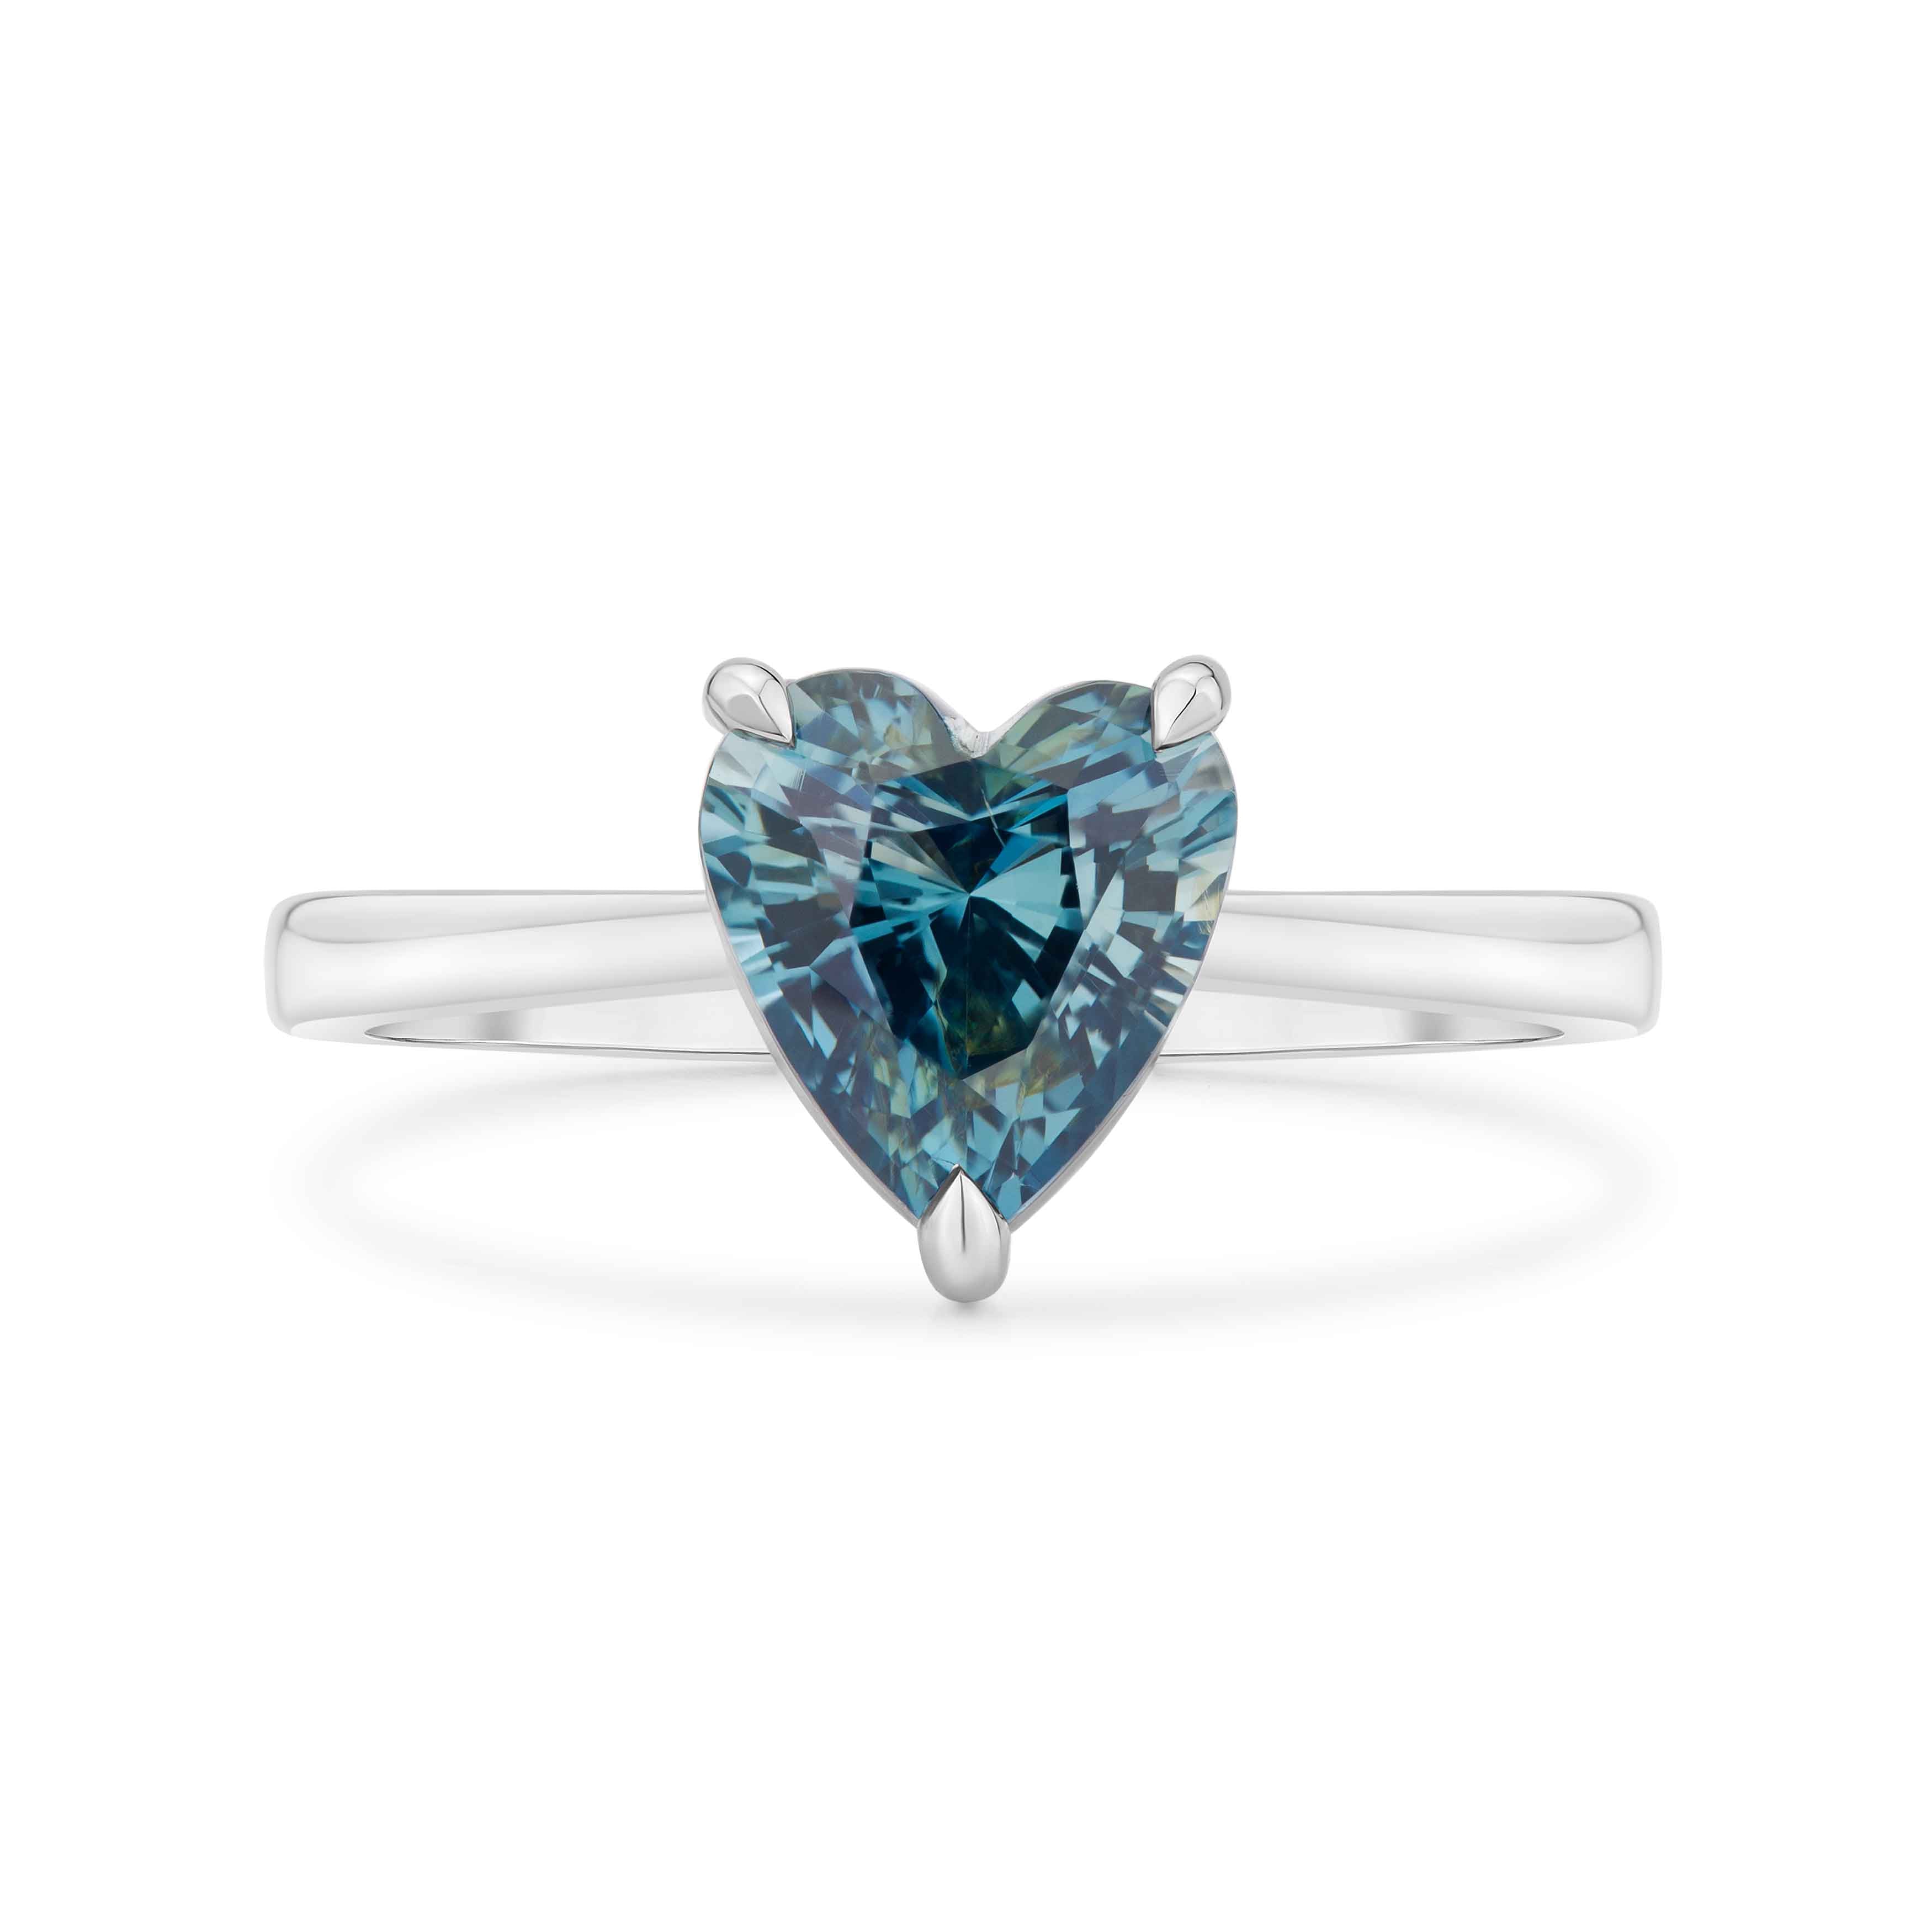 Moira Patience Fine Jewellery Heart Shaped Teal Sapphire Engagement Ring 